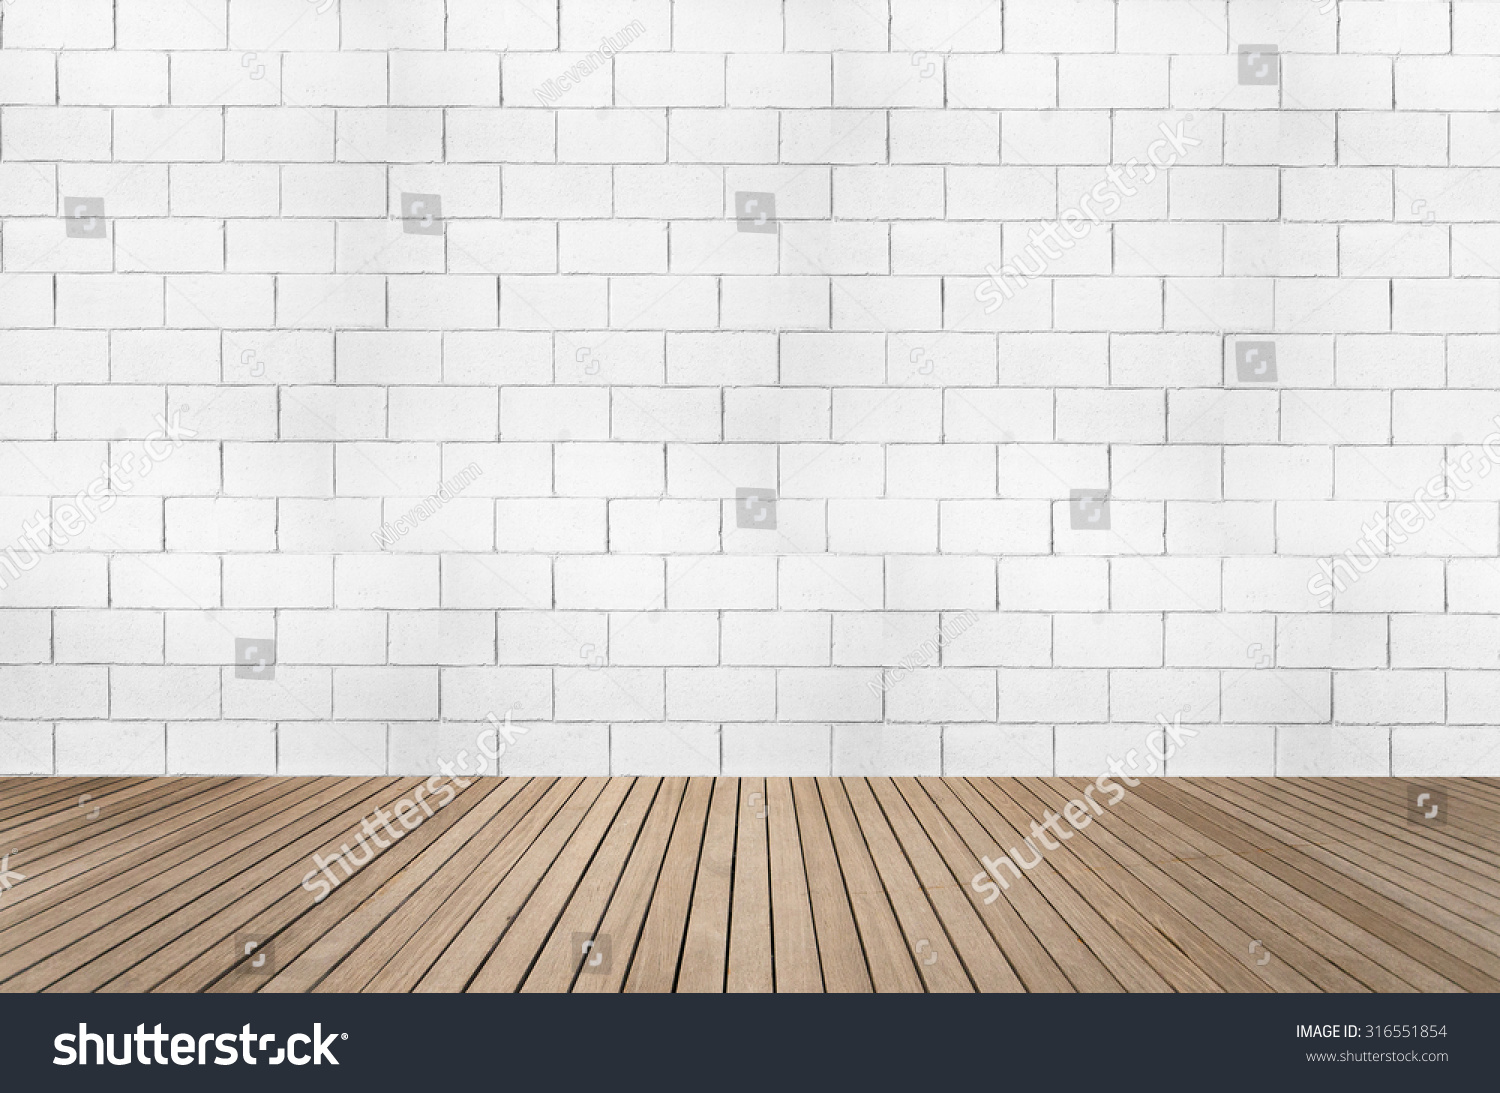 White brick wall textured background with wood floor in sepia brown tone for interiors #316551854